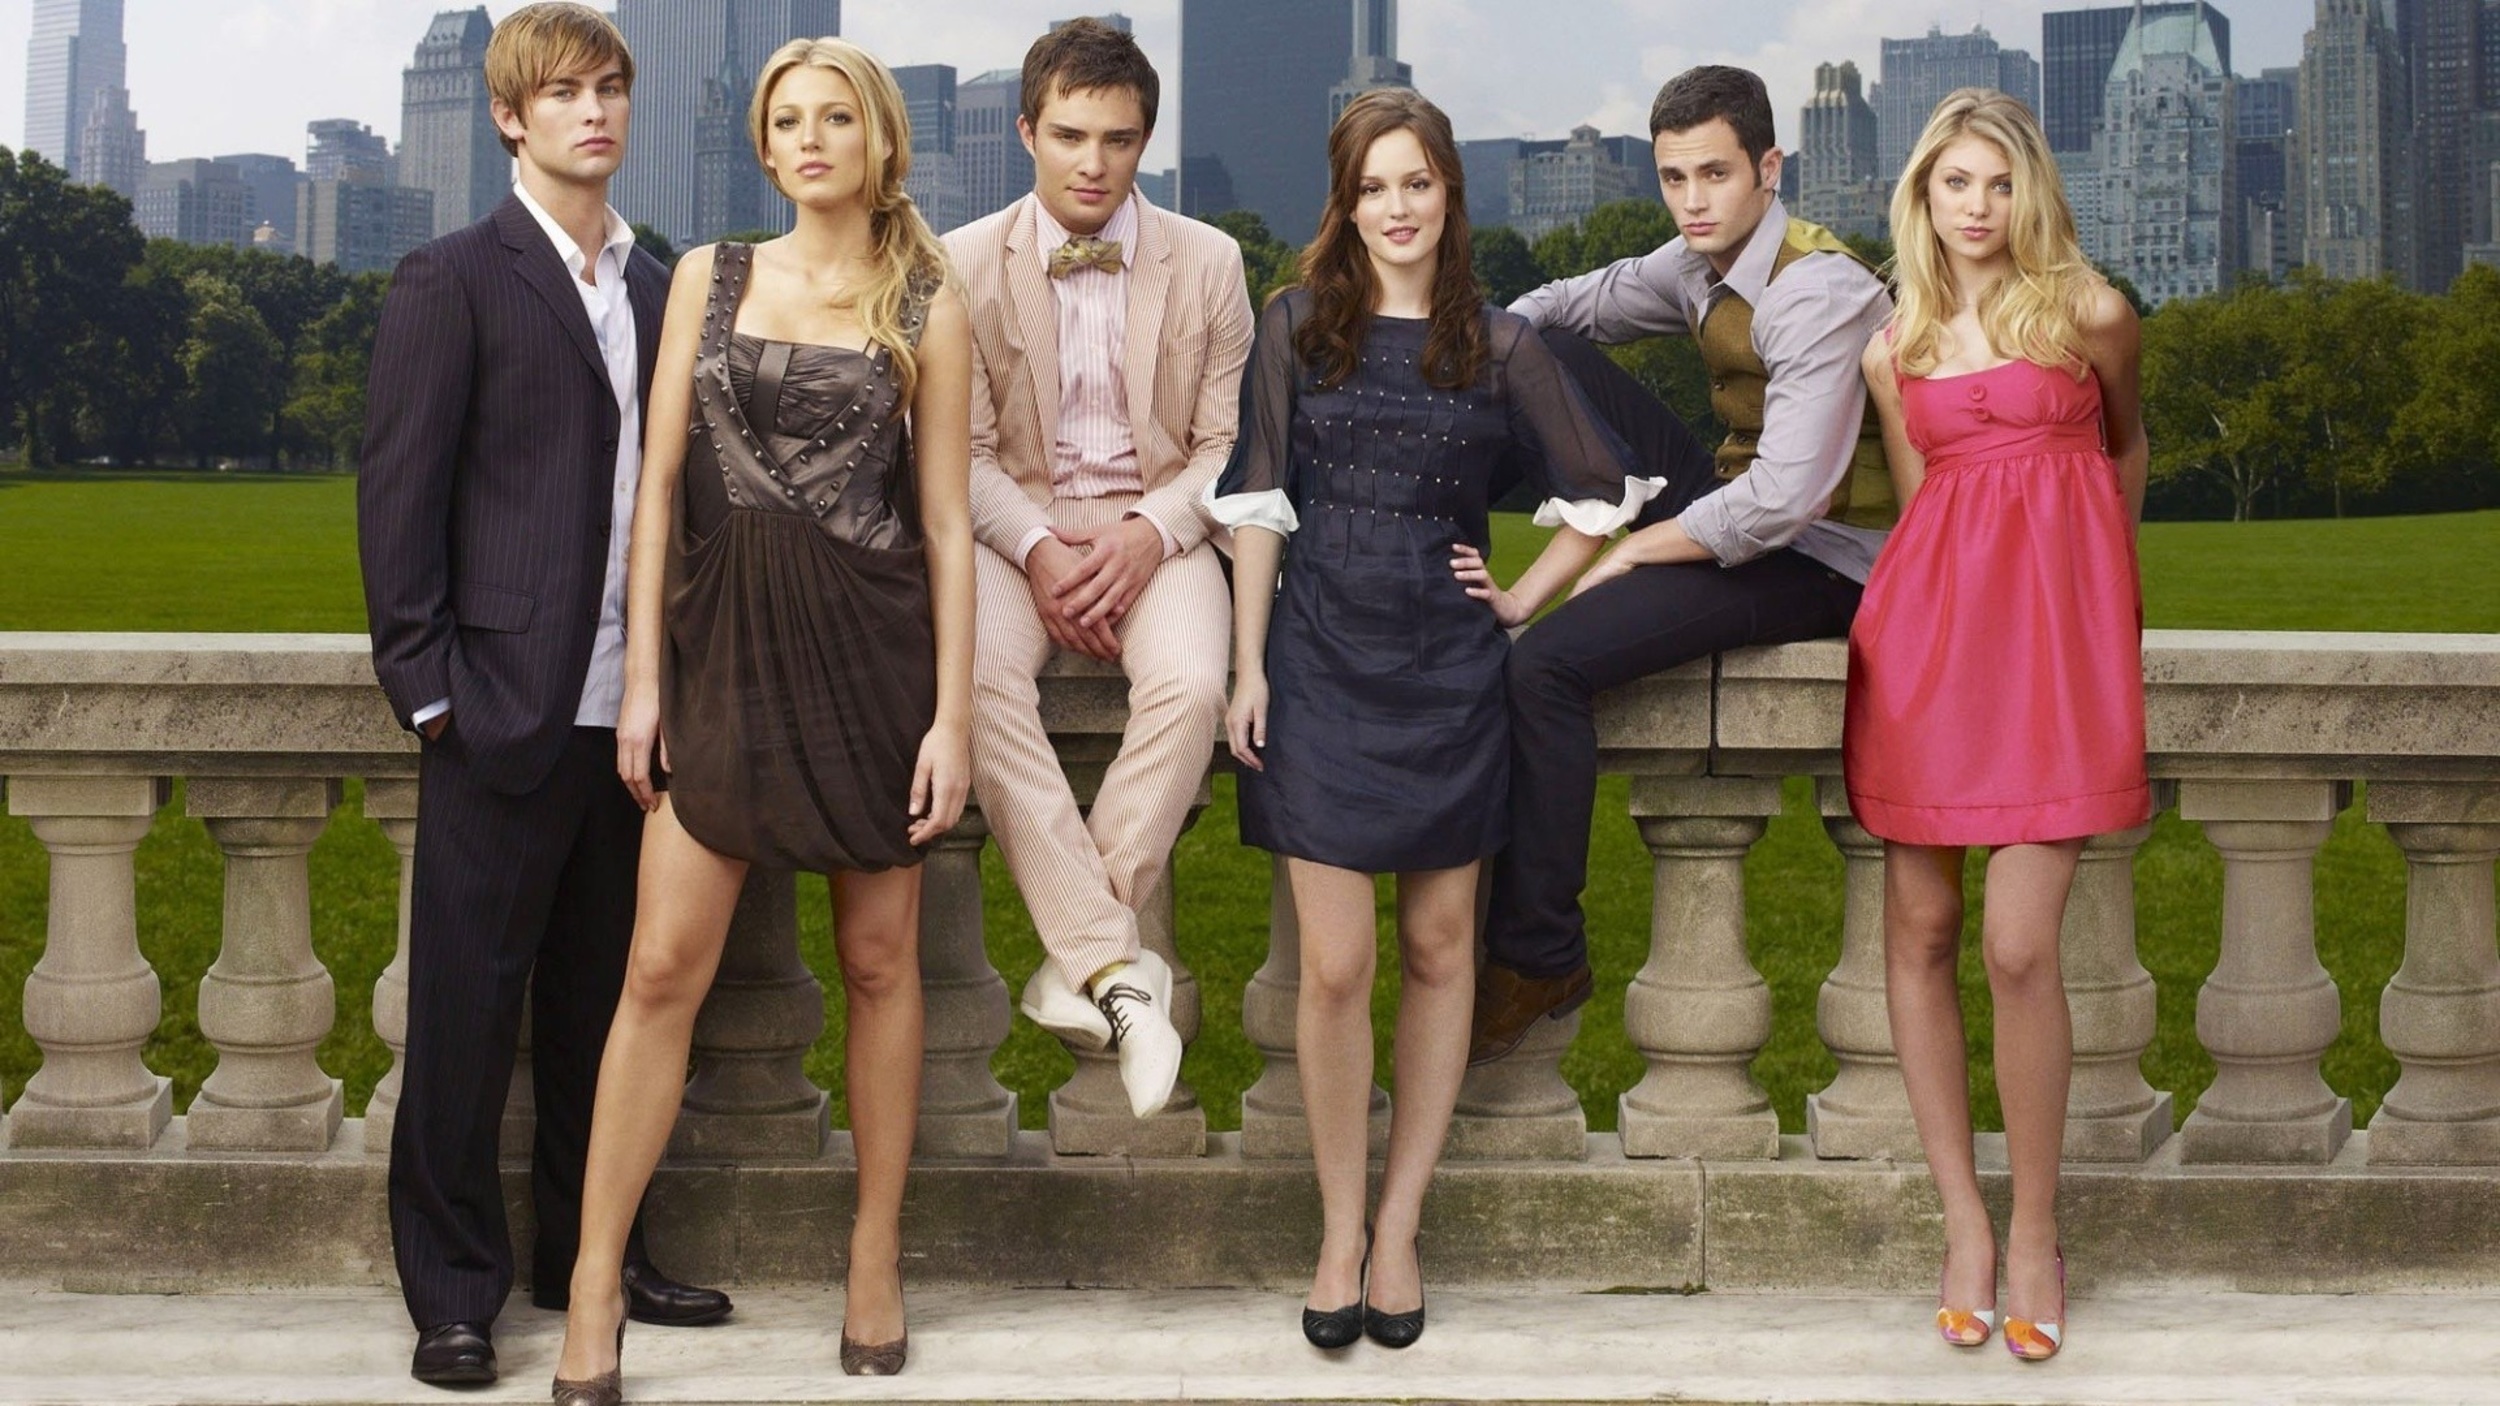 <p>Dan Humphrey is Gossip Girl. Gossip Girl is Dan Humphrey. That means Dan Humphrey was a psychopath of the highest order — as Gossip Girl often insulted him and actively ruined his life — and it also means that Serena ended up marrying her abuser when all was said and done. But don’t worry: The same could be said for Blair (who married Chuck) and Serena’s mother, Lily (who got back together with her ex-husband…who gave her fake cancer). At least Rufus ended up with Lisa Loeb, five seasons after Lisa Loeb shows up one time on the show to sing “Stay.”</p><p><a href='https://www.msn.com/en-us/community/channel/vid-cj9pqbr0vn9in2b6ddcd8sfgpfq6x6utp44fssrv6mc2gtybw0us'>Follow us on MSN to see more of our exclusive entertainment content.</a></p>